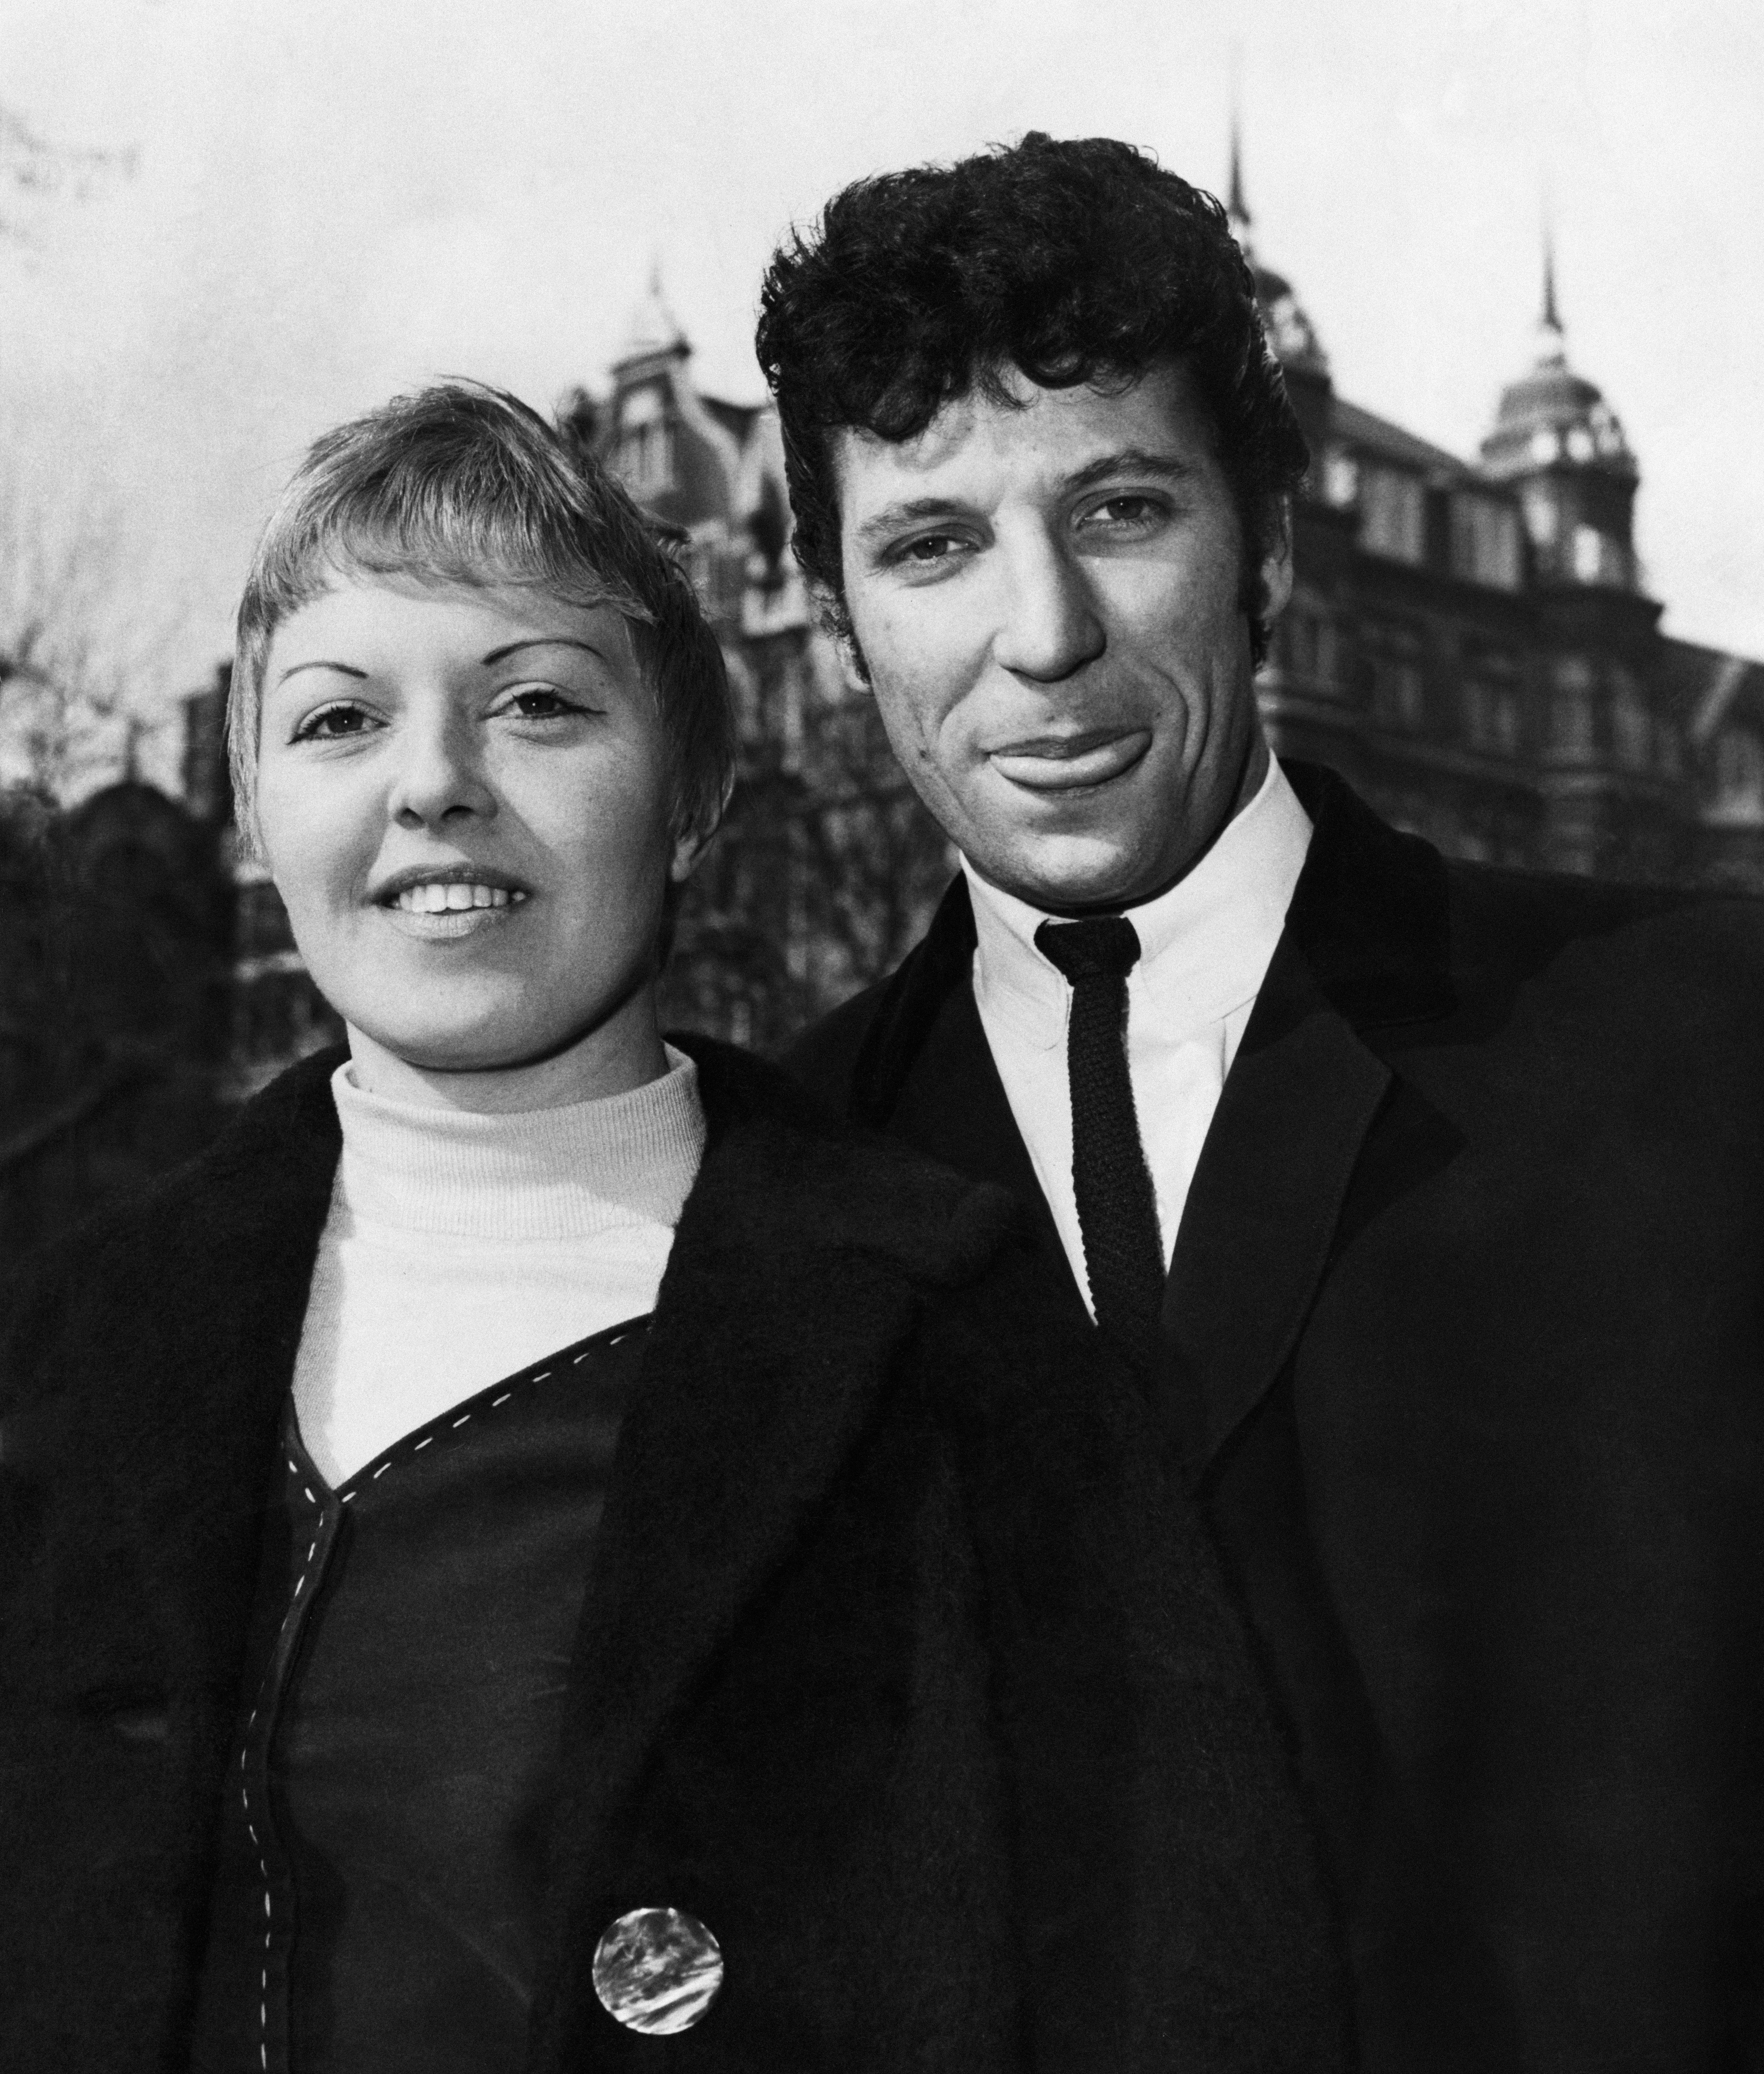 Tom Jones at home with his wife Melinda (Linda) Woodward, in Hanover Square London om March 10, 1965 | Source: Getty Images